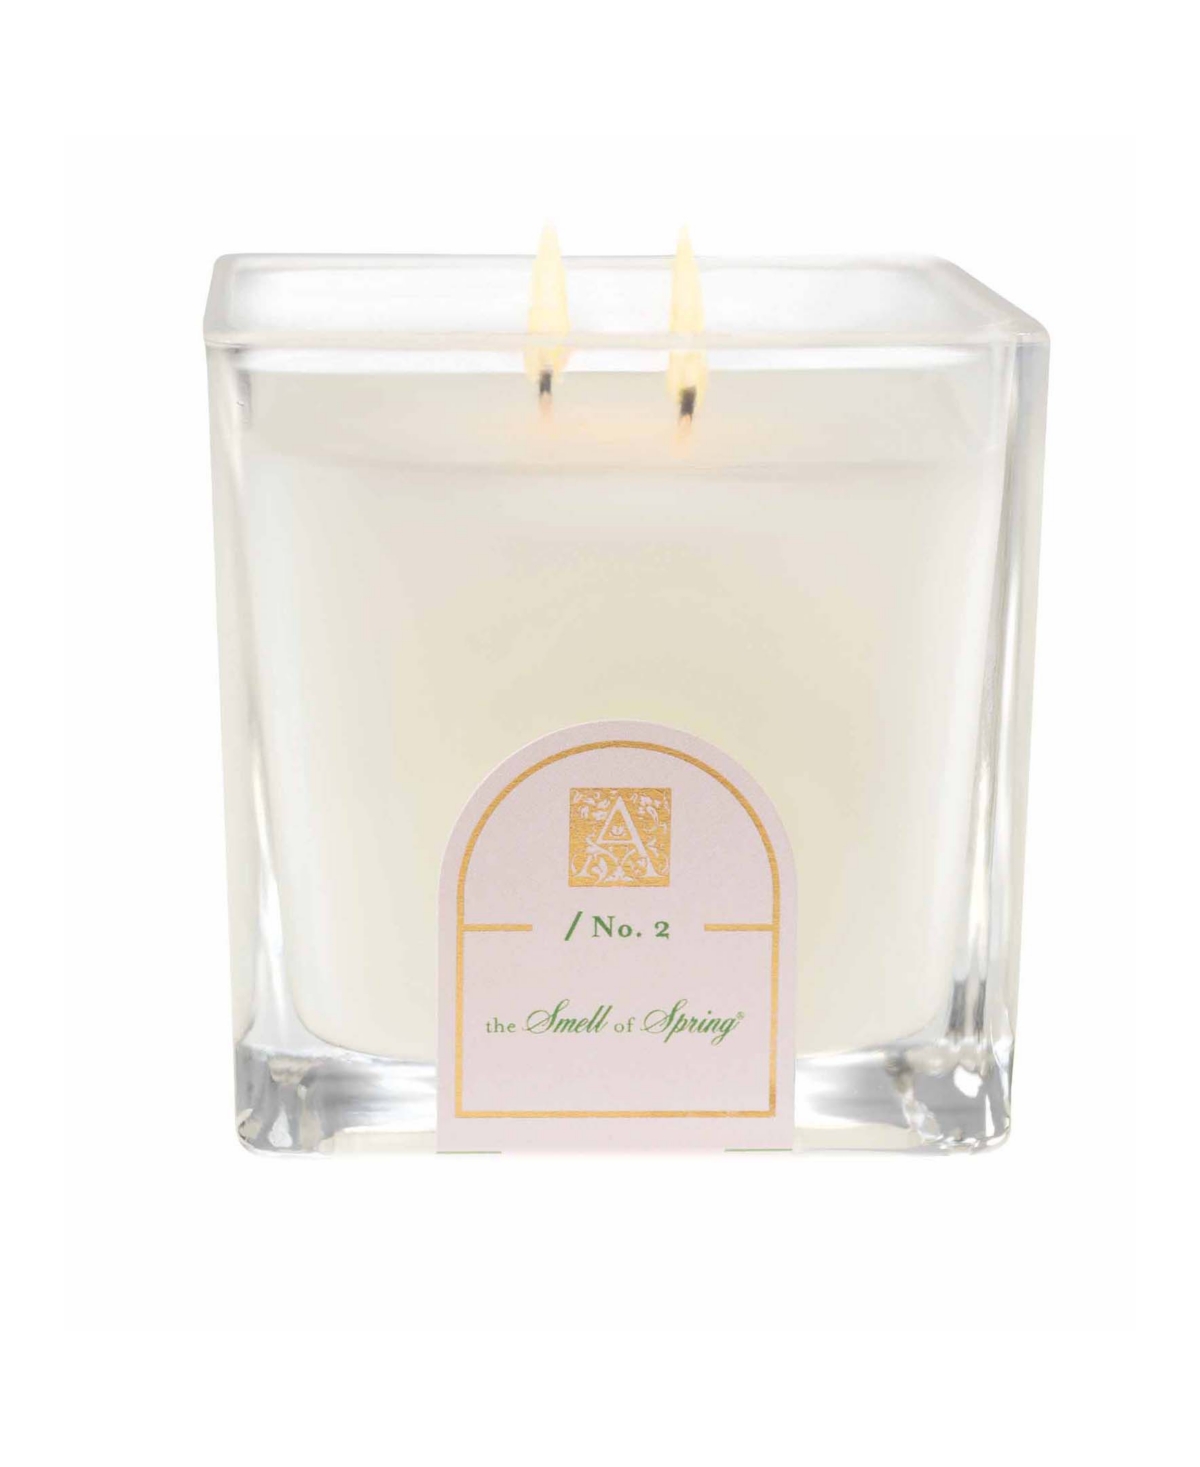 The Smell of Spring 12-oz. Medium Cube Candle - White